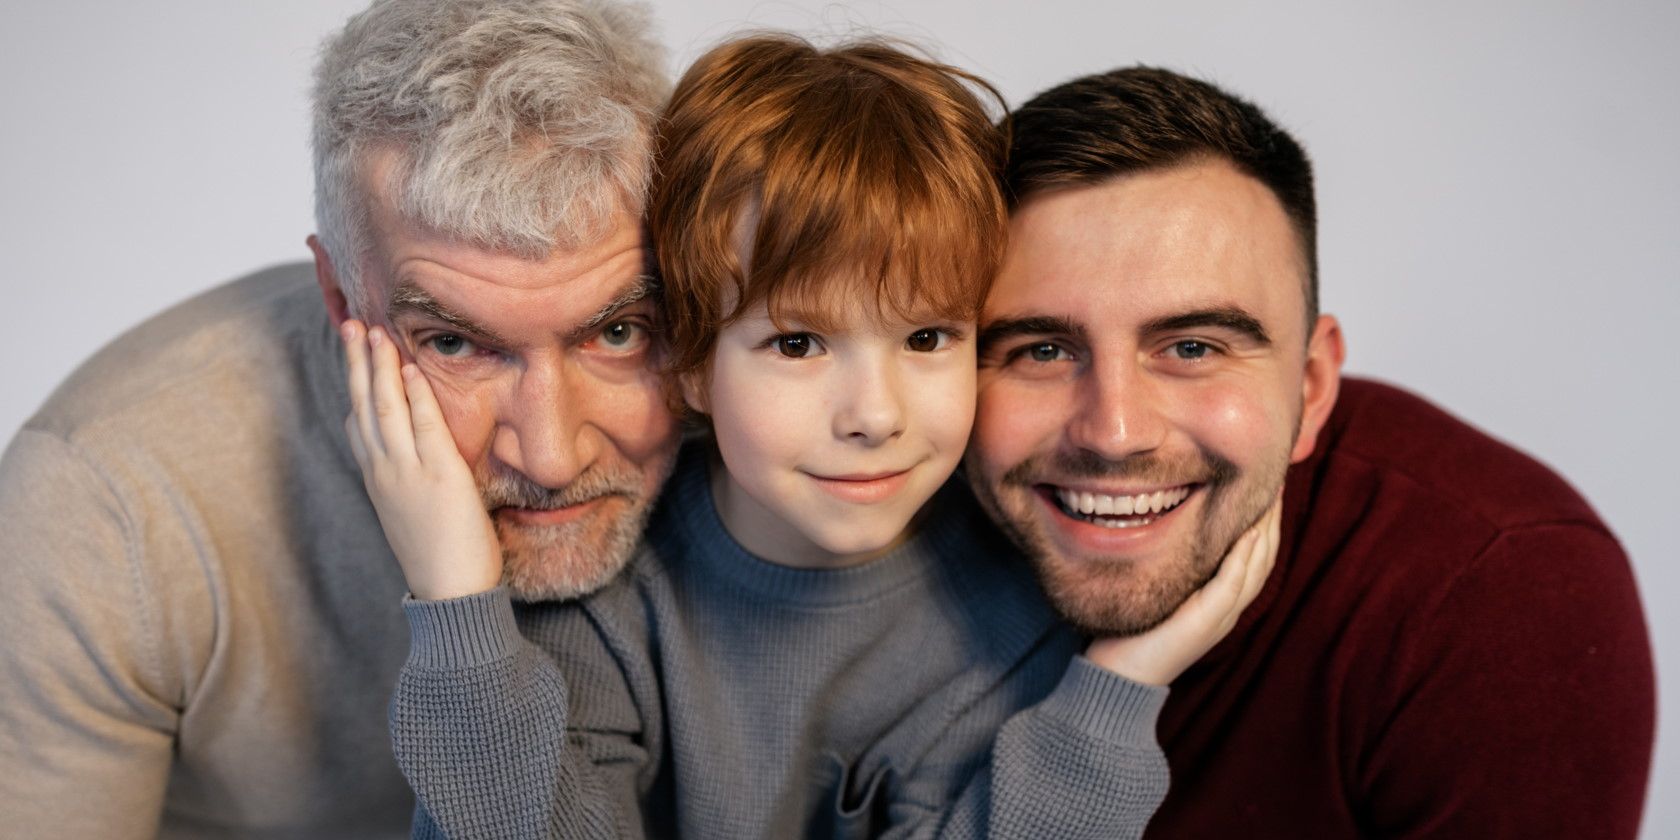 Three members of family young boy man and granddad smiling